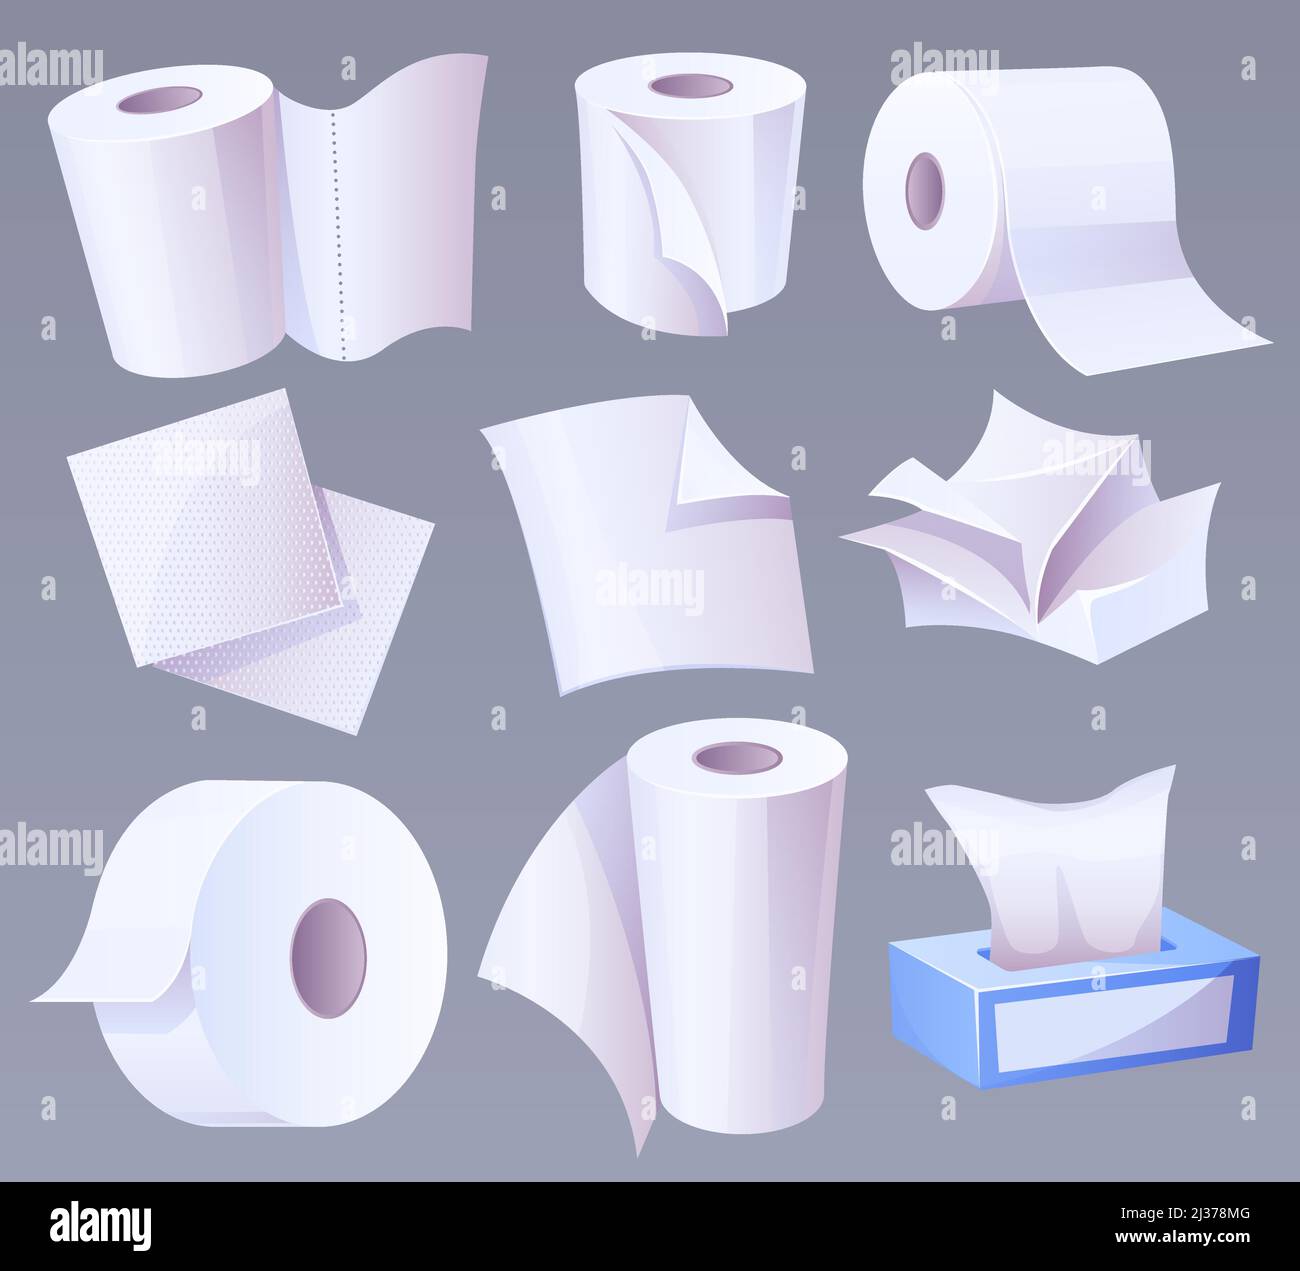 Cellulose production toilet paper, towel with perforation, napkins in carton box, crumpled page and rolls. Hygiene or office accessories isolated on g Stock Vector